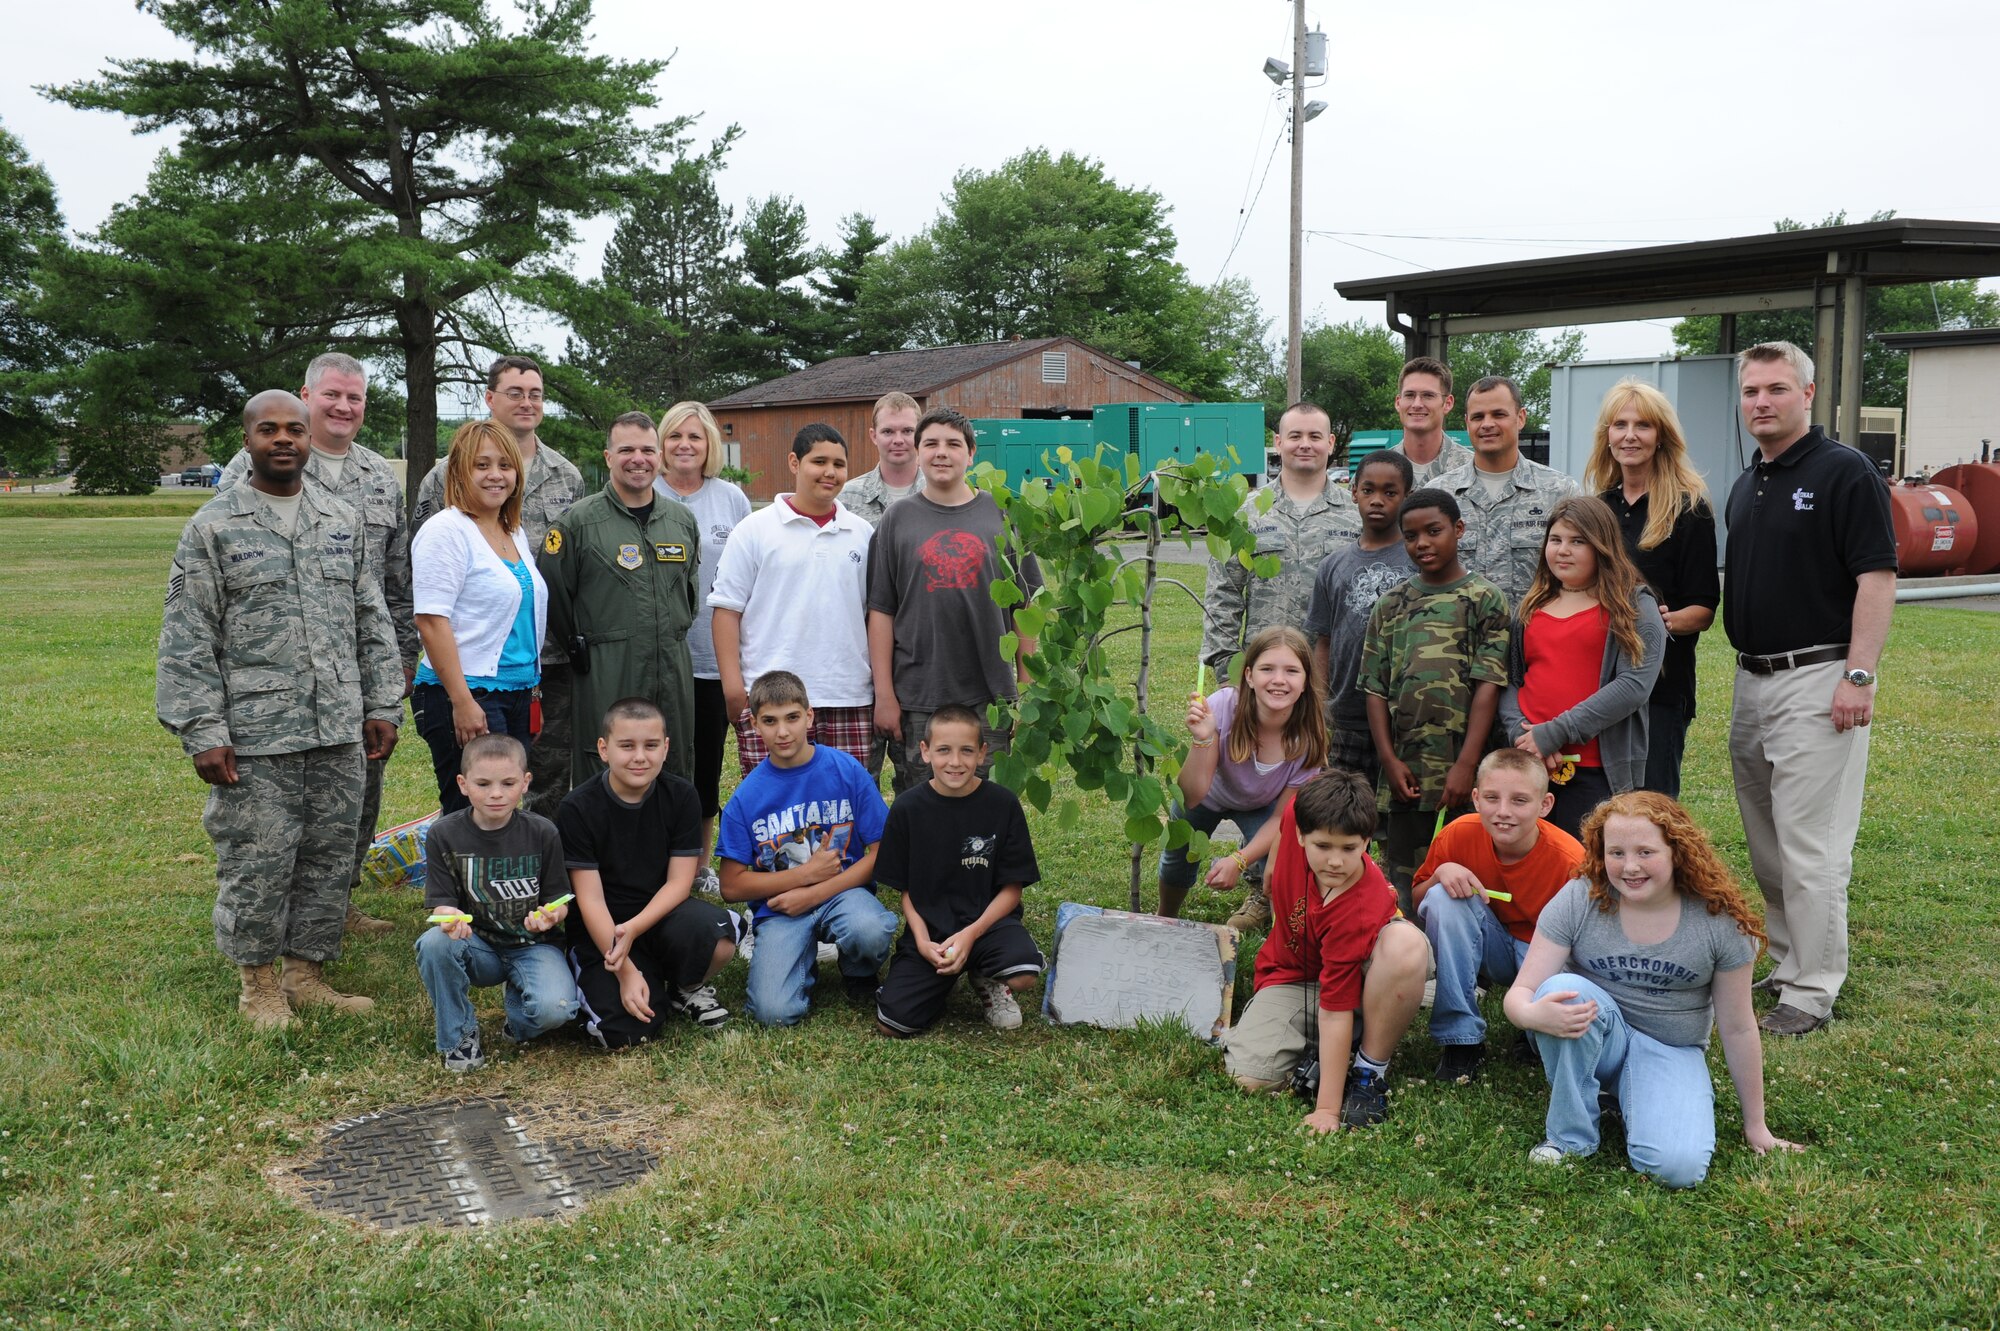 JOINT BASE MCGUIRE-DIX-LAKEHURST, N.J. -- Sixth-grade students from Jonas Salk Middle School present members of the 818th Global Mobility Squadron with a tree and plaque during a tour here June 9.  The 621st Contingency Response Wing's 818th Global Mobility Squadron invited 16 special education students from Jonas Salk Middle School in Old Bridge, N.J. to visit the base for a tour of aircraft, facilities and equipment. (U.S. Air Force photo by Tech. Sgt. Laura K. Deckman)(released)